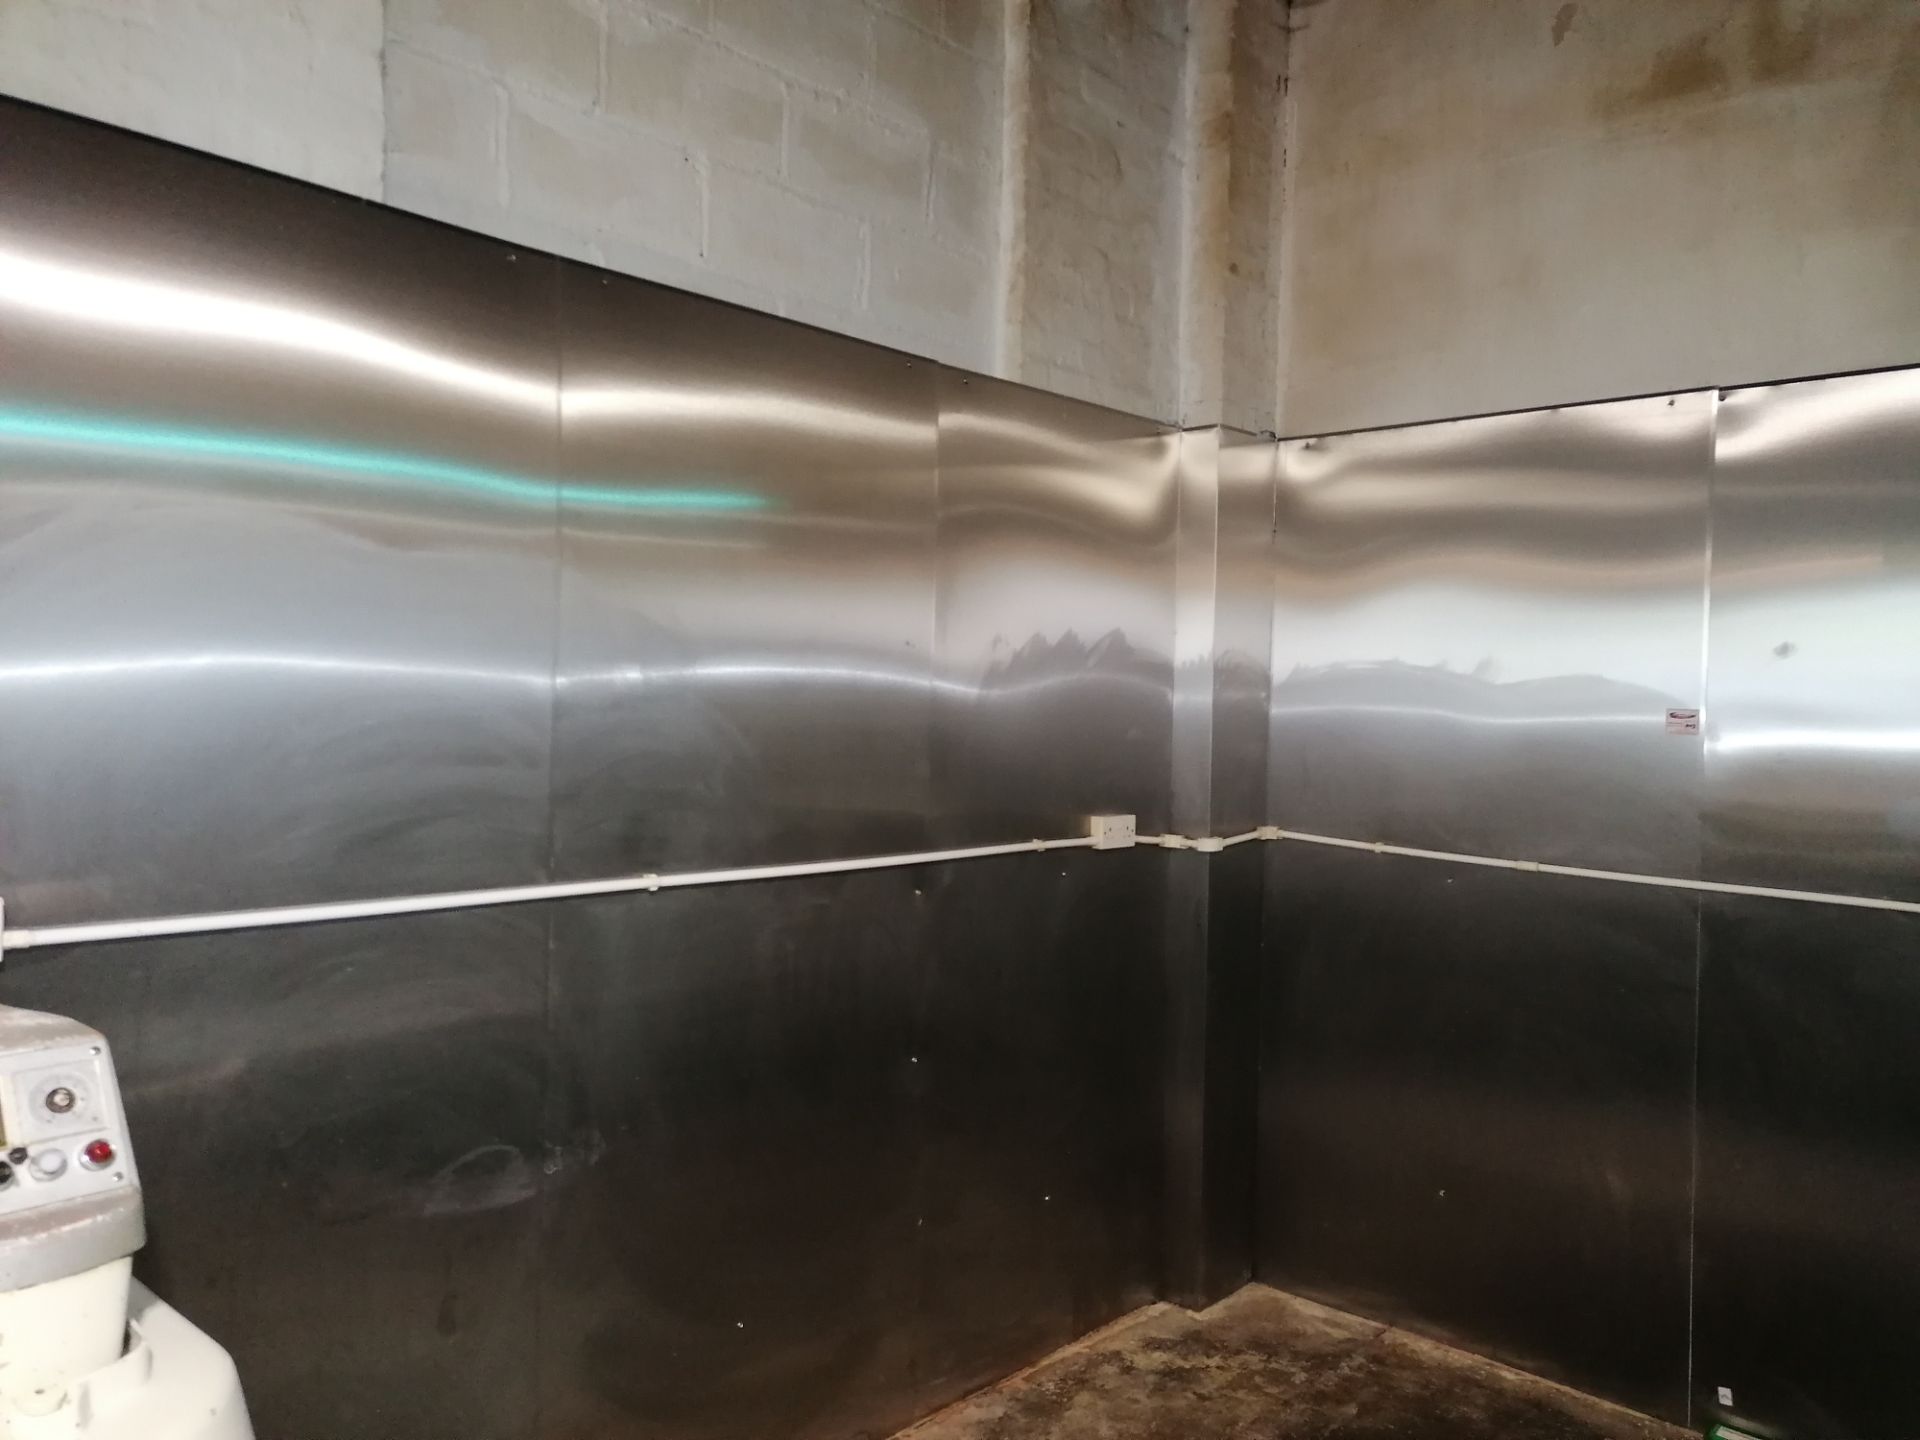 Approx 6 x Stainless Steel Wall Panels Recently Fitted - Image 2 of 5